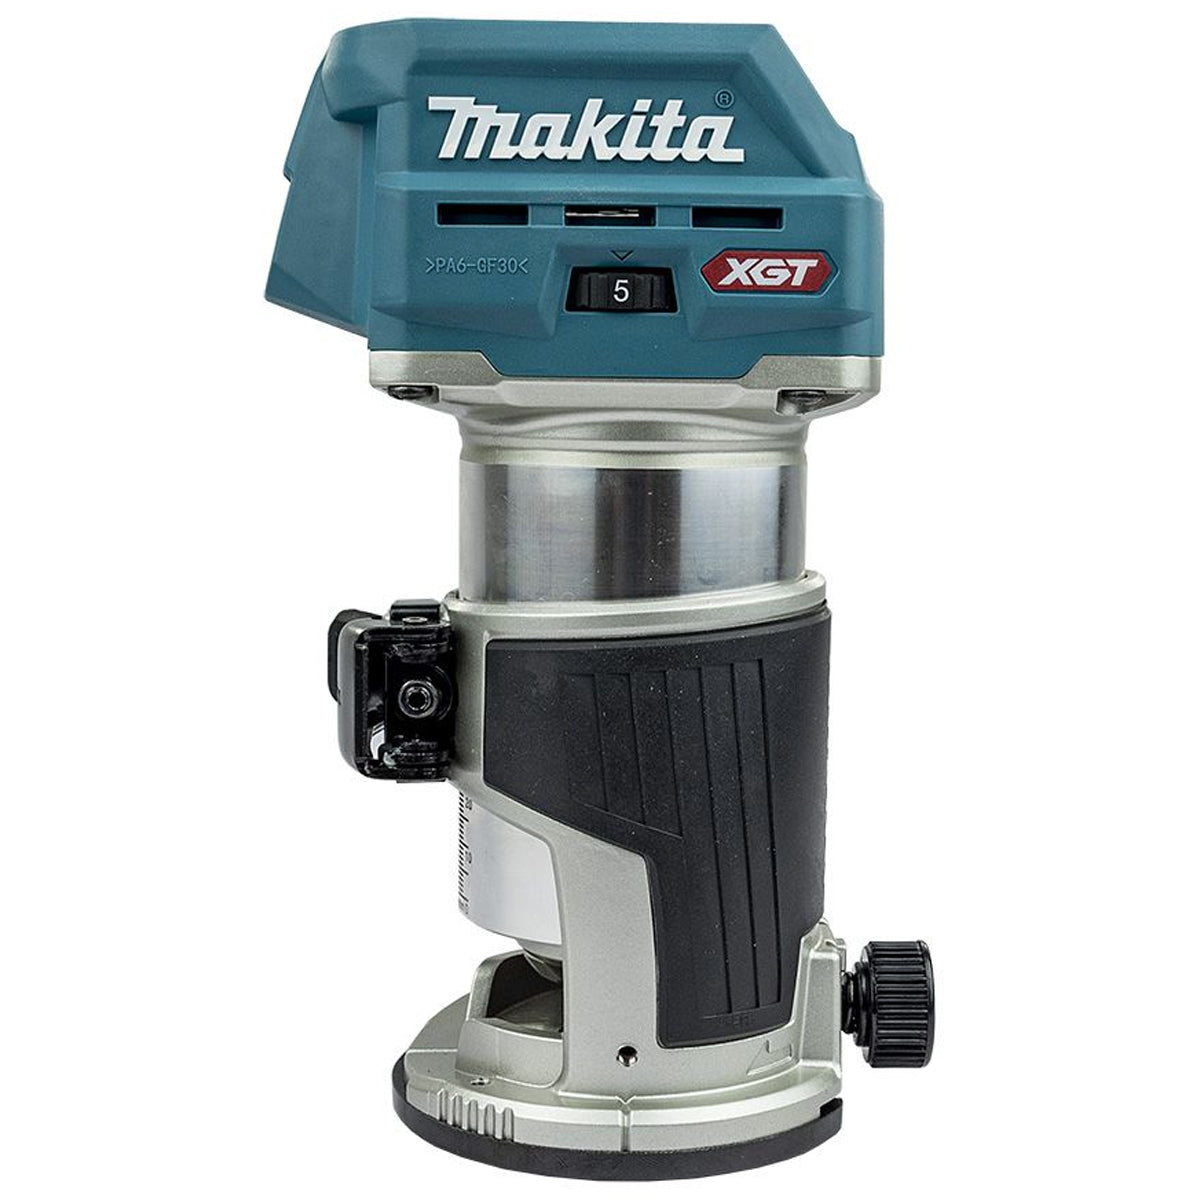 Makita RT001GZ16 40Vmax XGT Brushless Router Trimmer With Type 4 Case